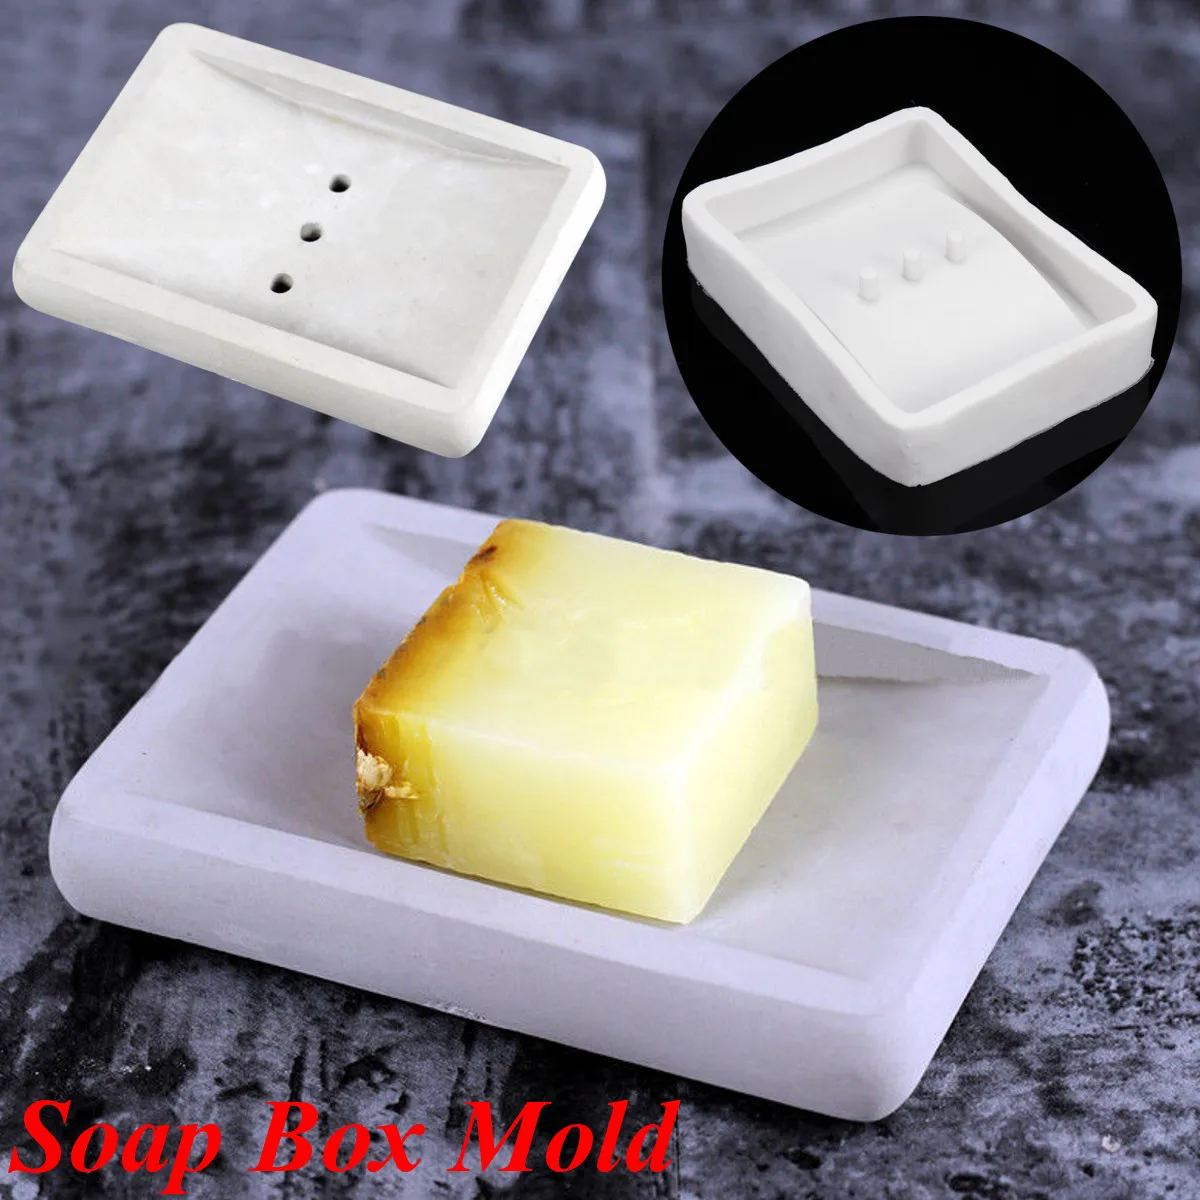 

Silicone Soap Box Holder Mold Cake Baking Mould Handmade Soap Candle Mould Crafts Concrete Clay DIY Tools Rectangle Nonstick